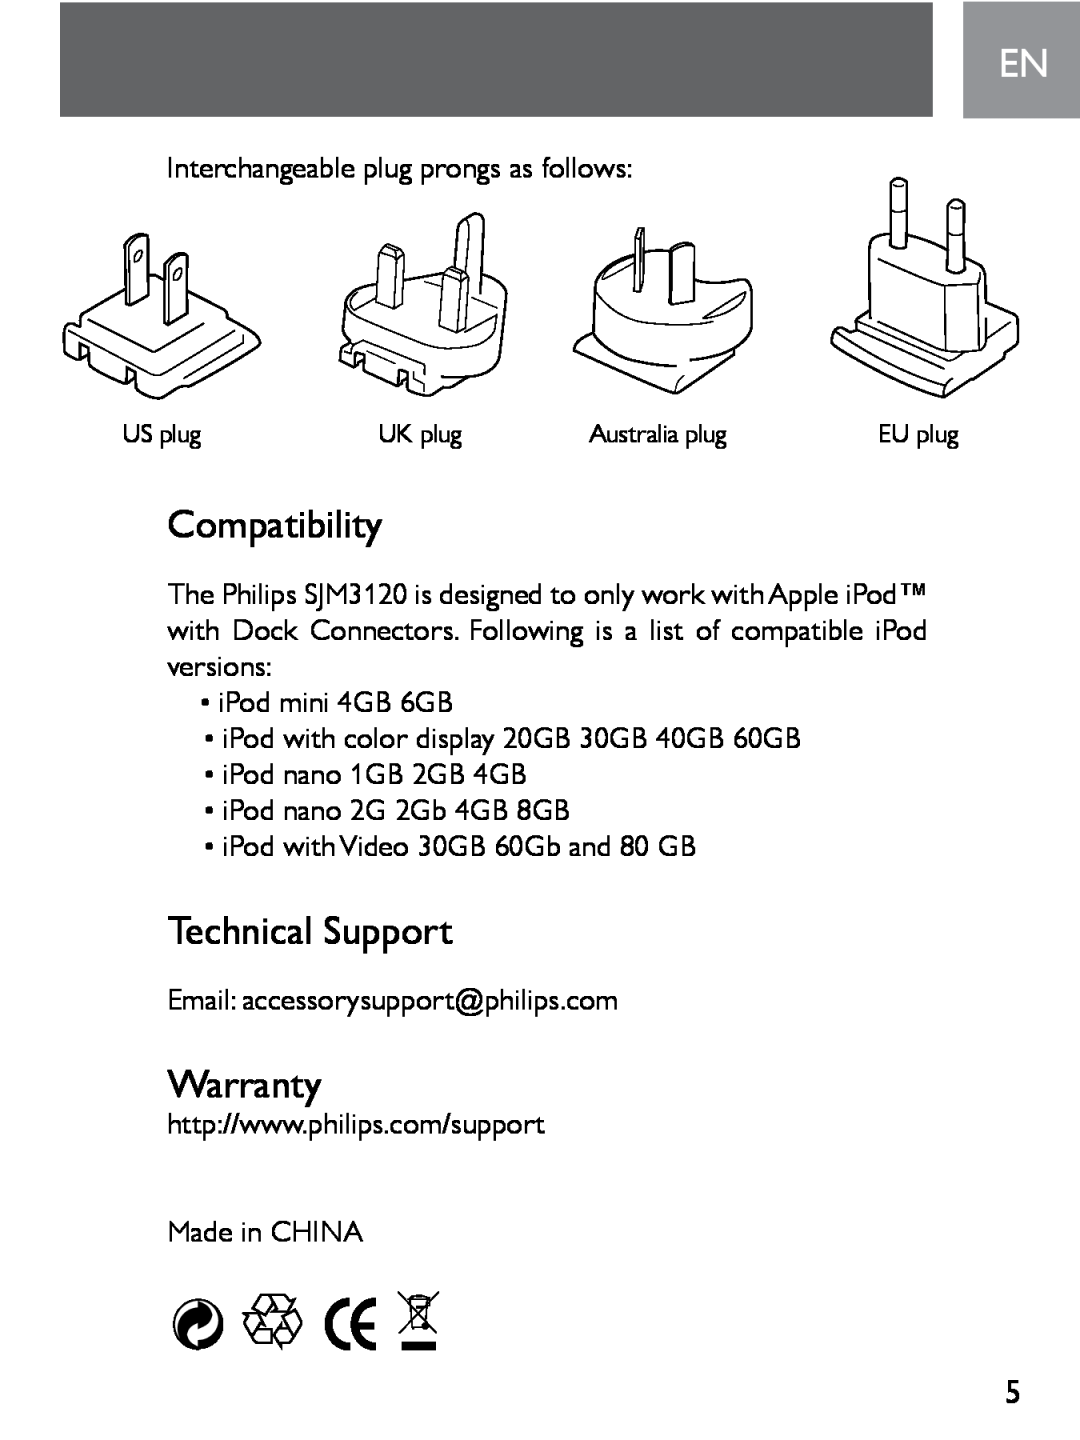 Philips SJM3120 user manual Compatibility, Technical Support, Warranty 